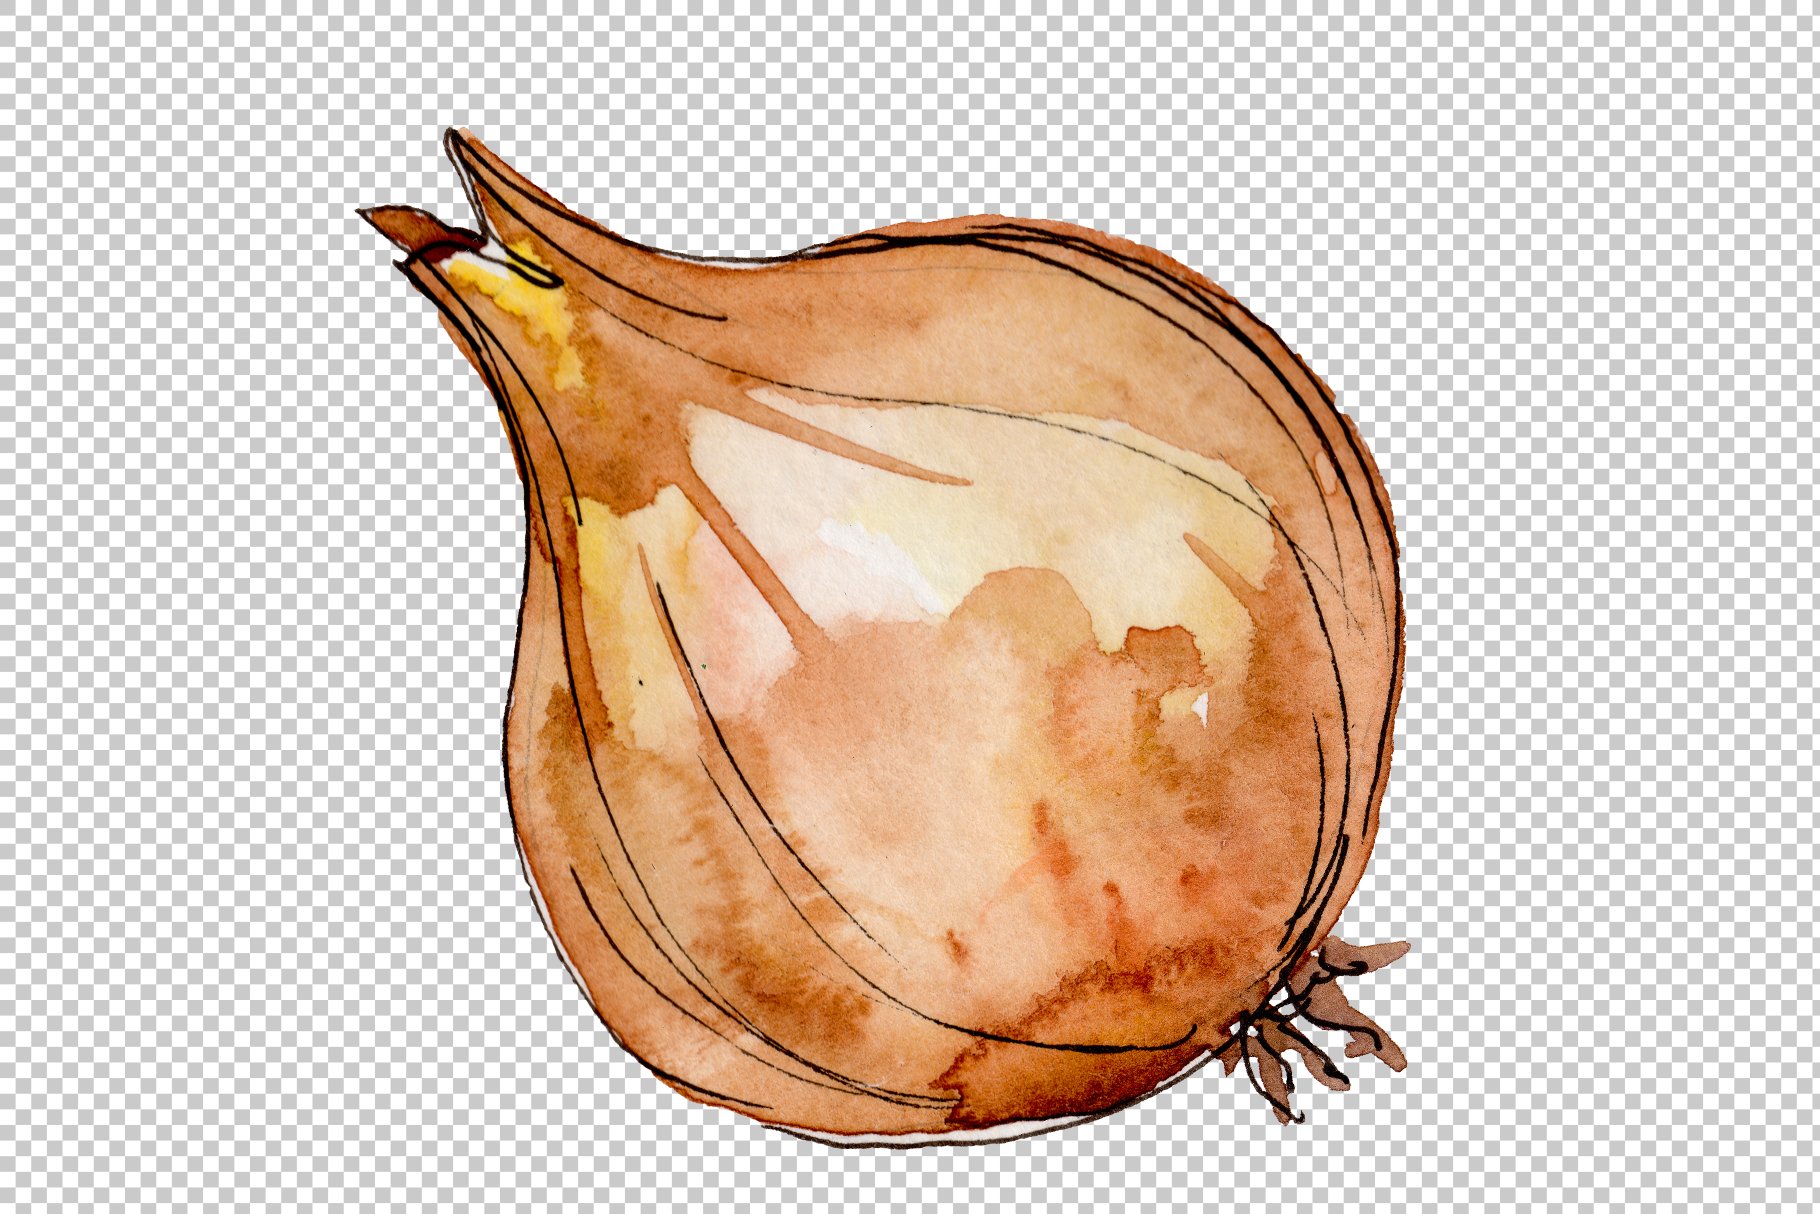 Classic onion in a watercolor style.